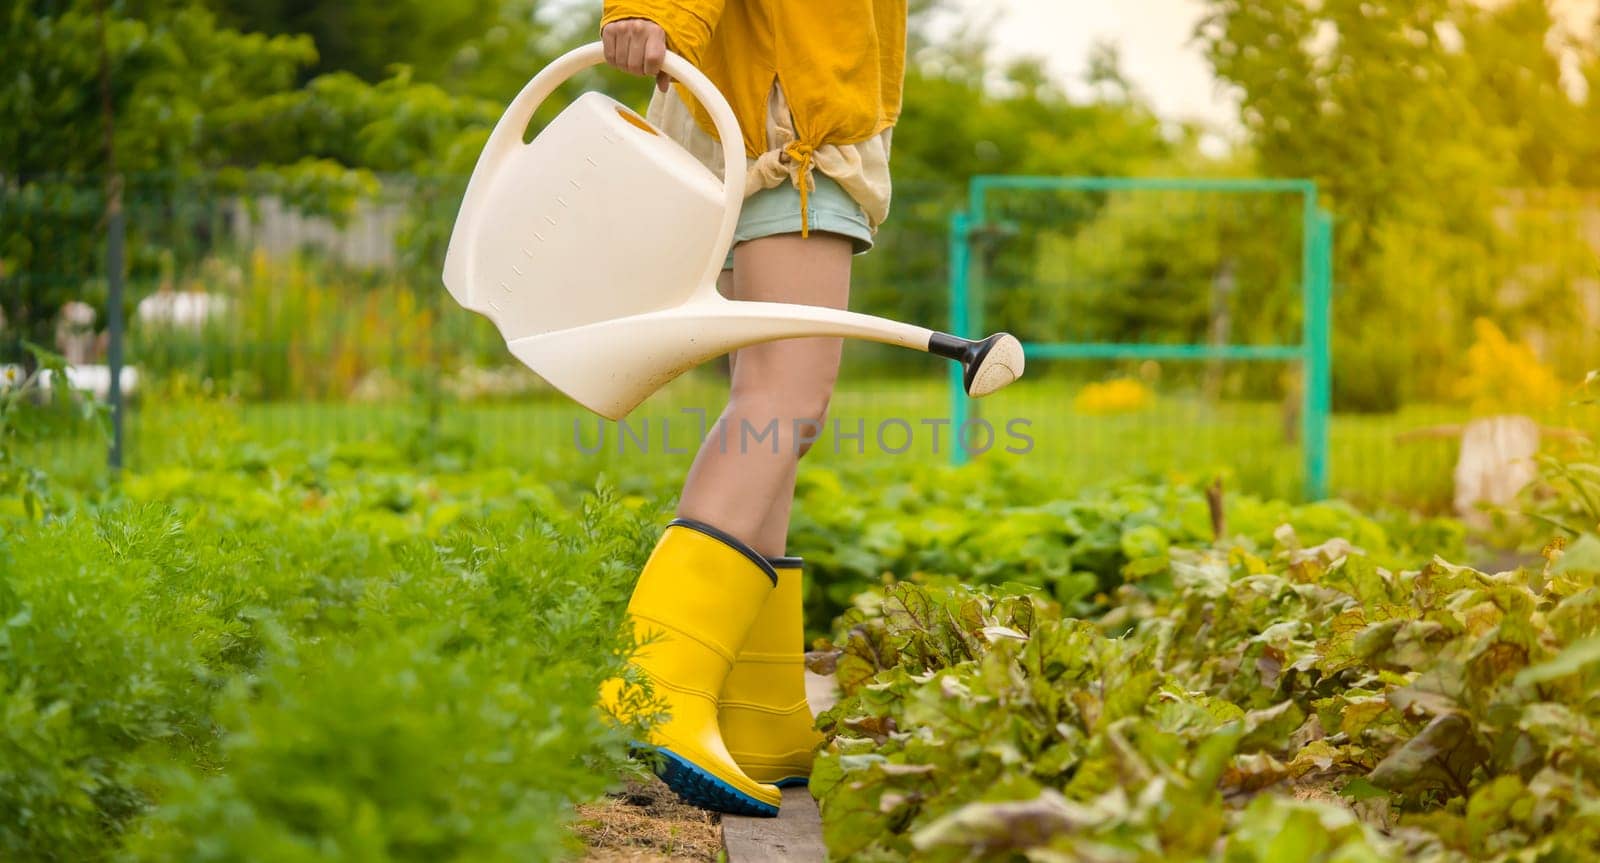 A young girl with gloves and rubber boots is going to water plants in her beautiful summer garden. A professional woman gardener with a watering can is irrigating her lawn and flowers.